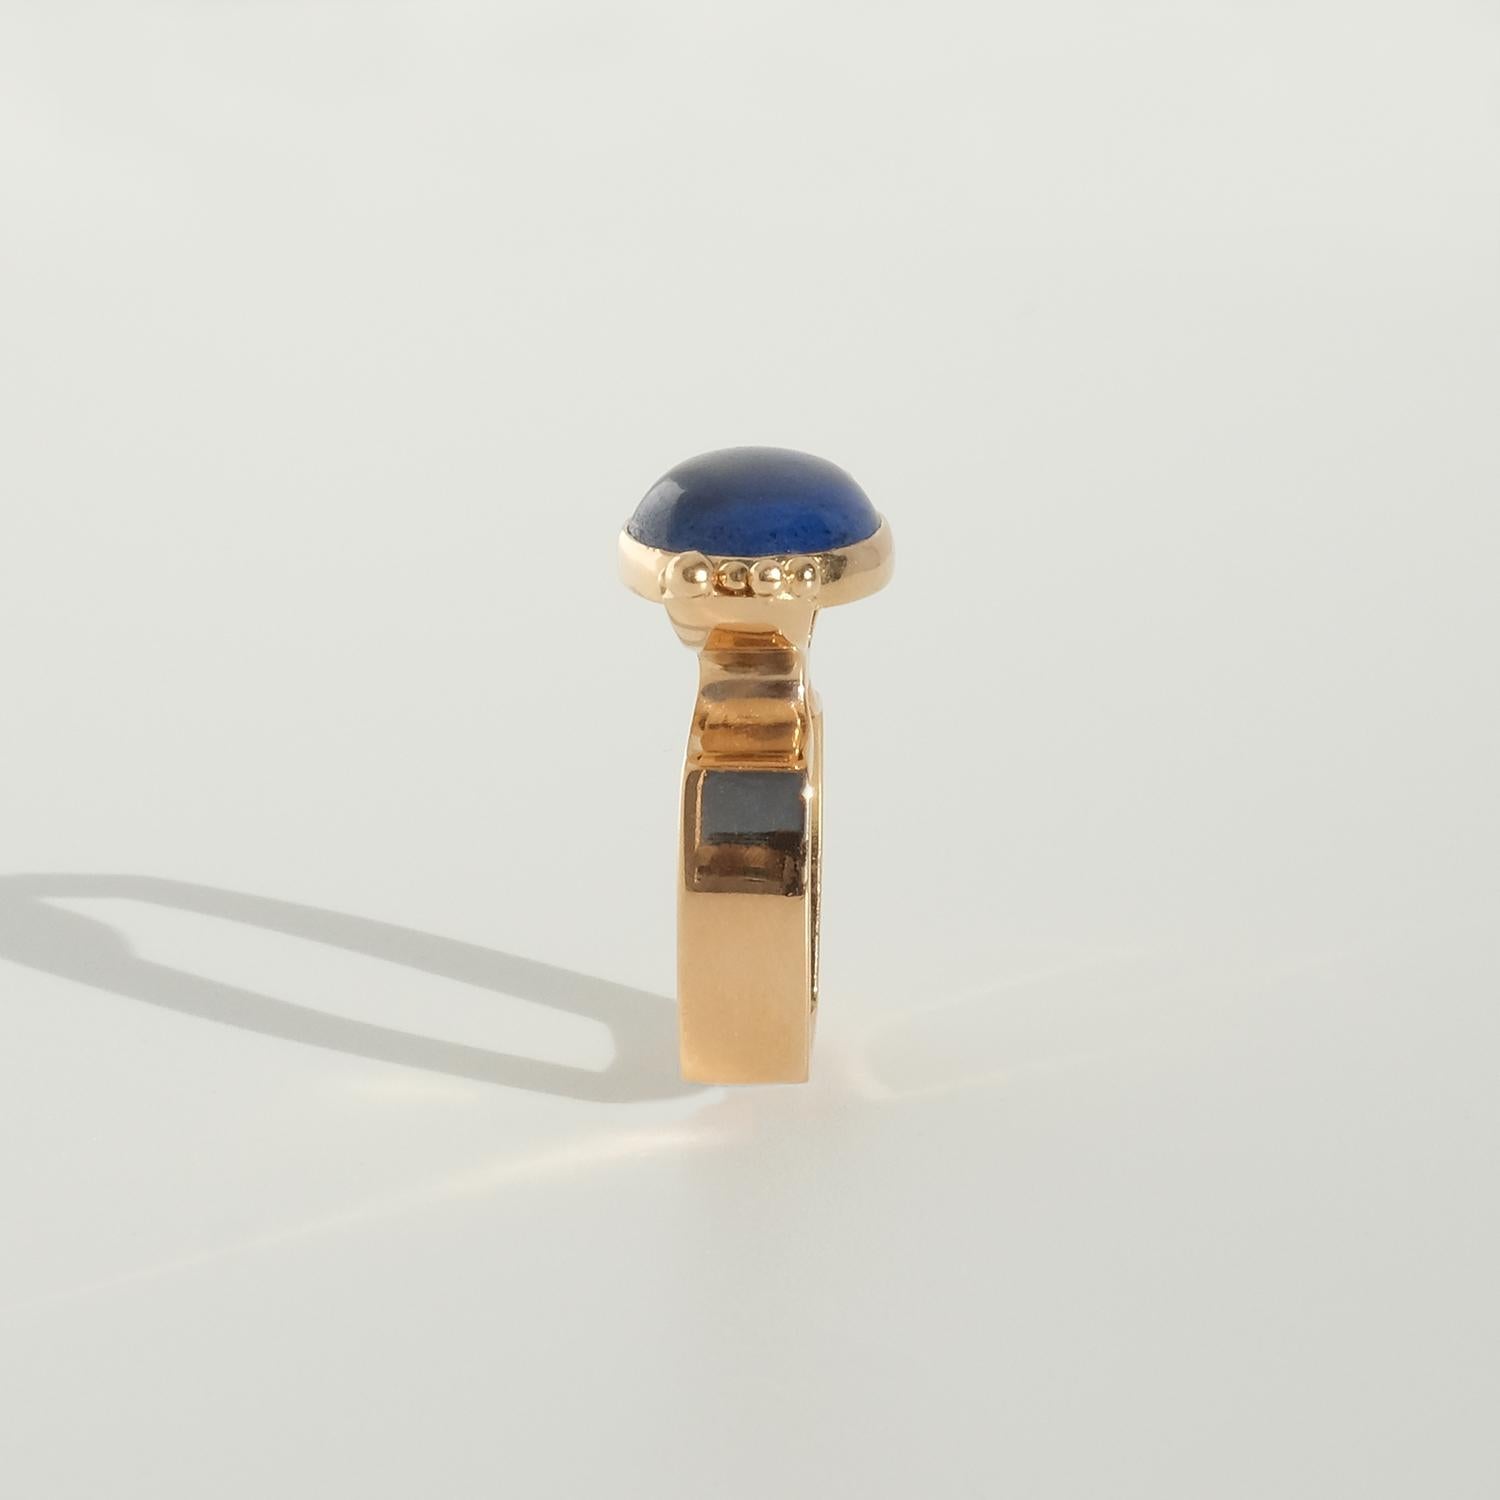 18 K Gold Ring with a Cabochon Cut Lapis Lazuli Stone, Made in 1972 In Good Condition For Sale In Stockholm, SE